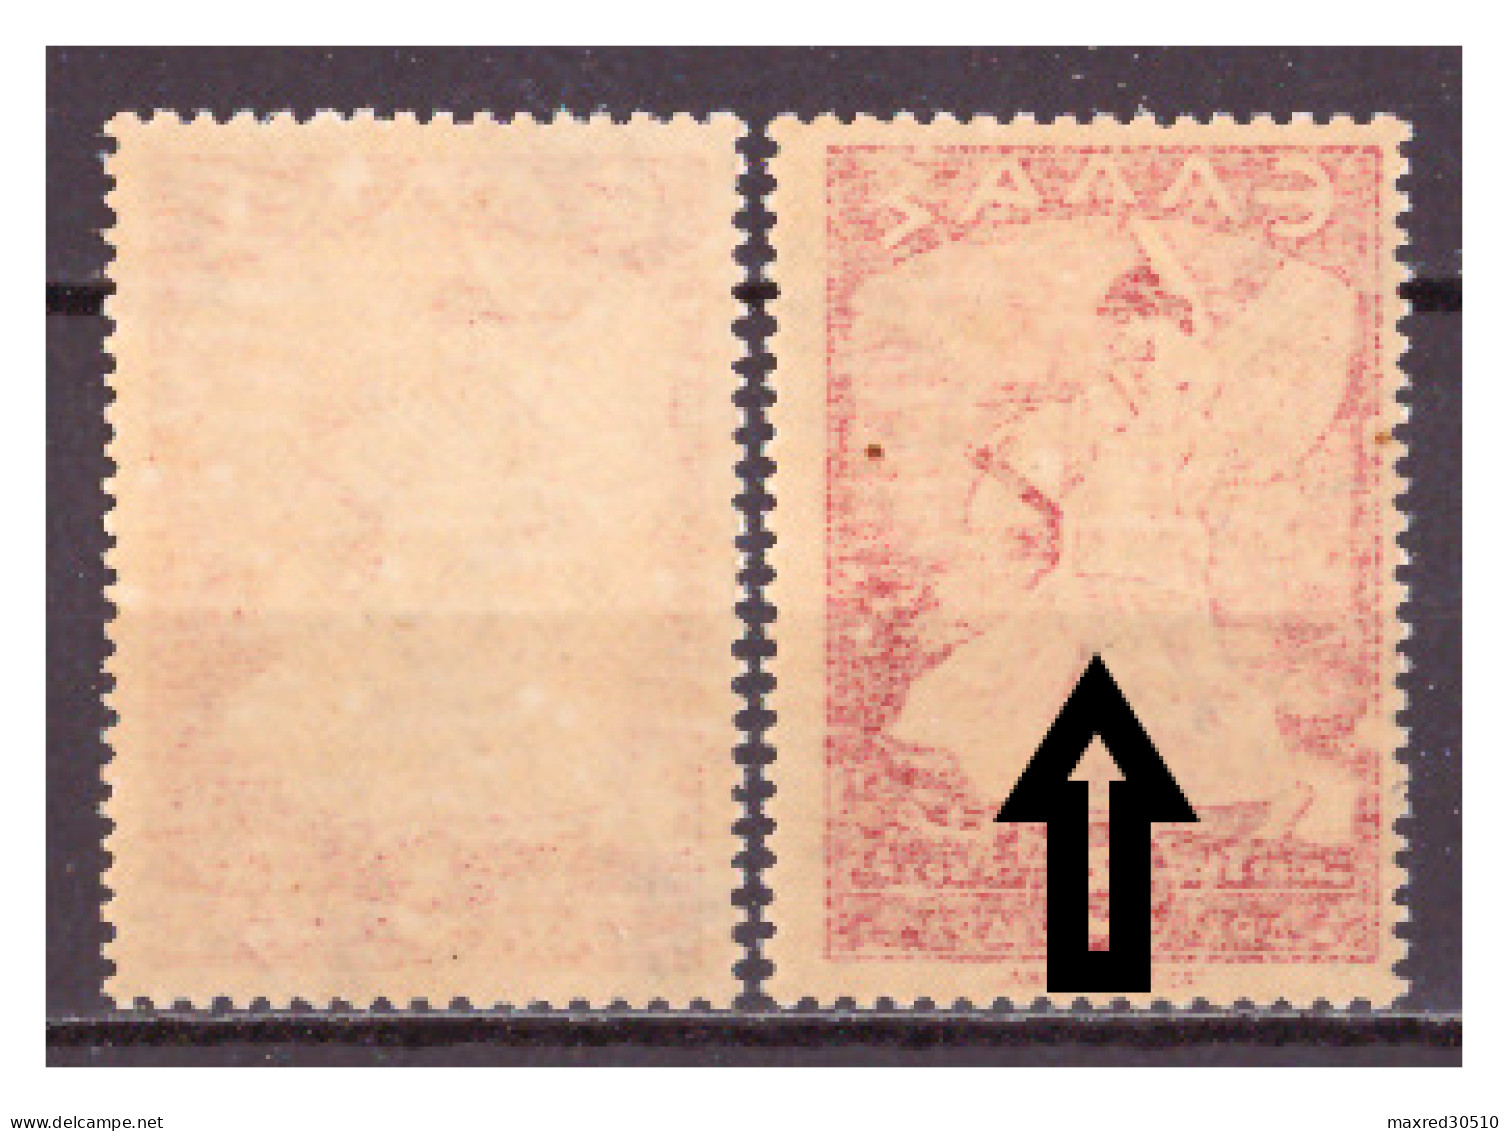 GREECE 1945 2X3L. OF THE "GLORY ISSUE" THE 2ND ONE (SEE ARROWS) WITH MIRROR PRINTING AT THE GUM ERROR MNH - Plaatfouten En Curiosa